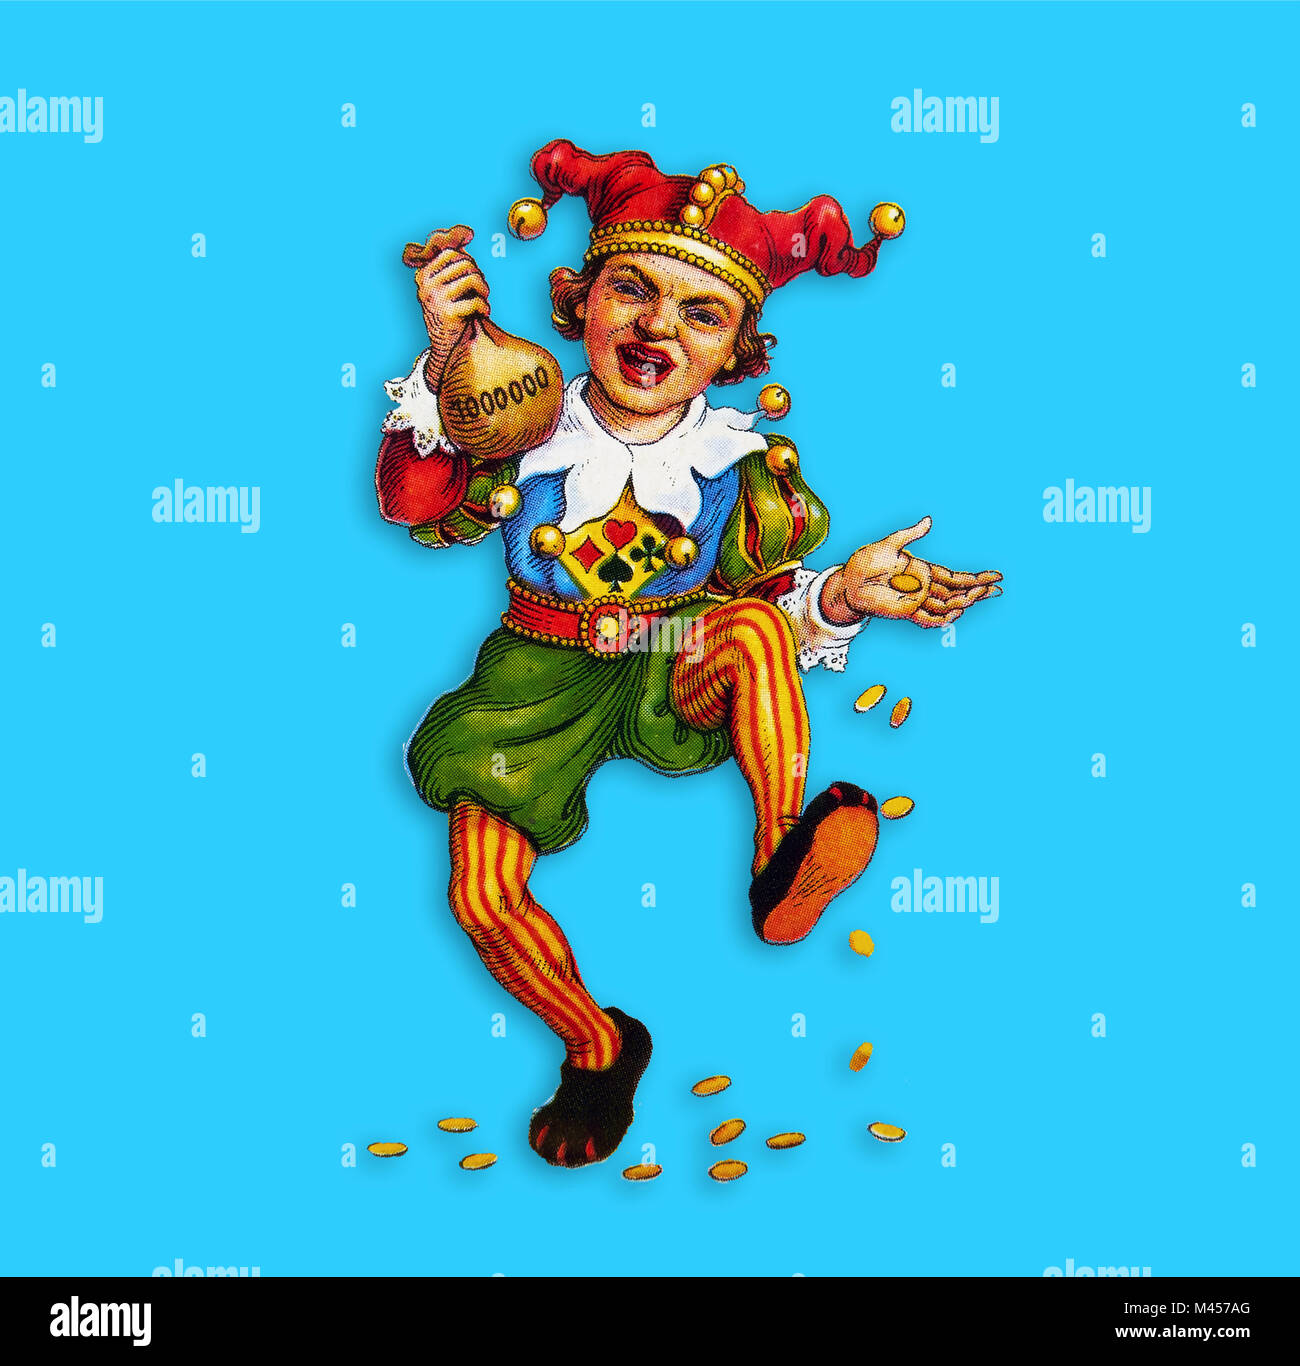 Card joker in the blue square Stock Photo - Alamy